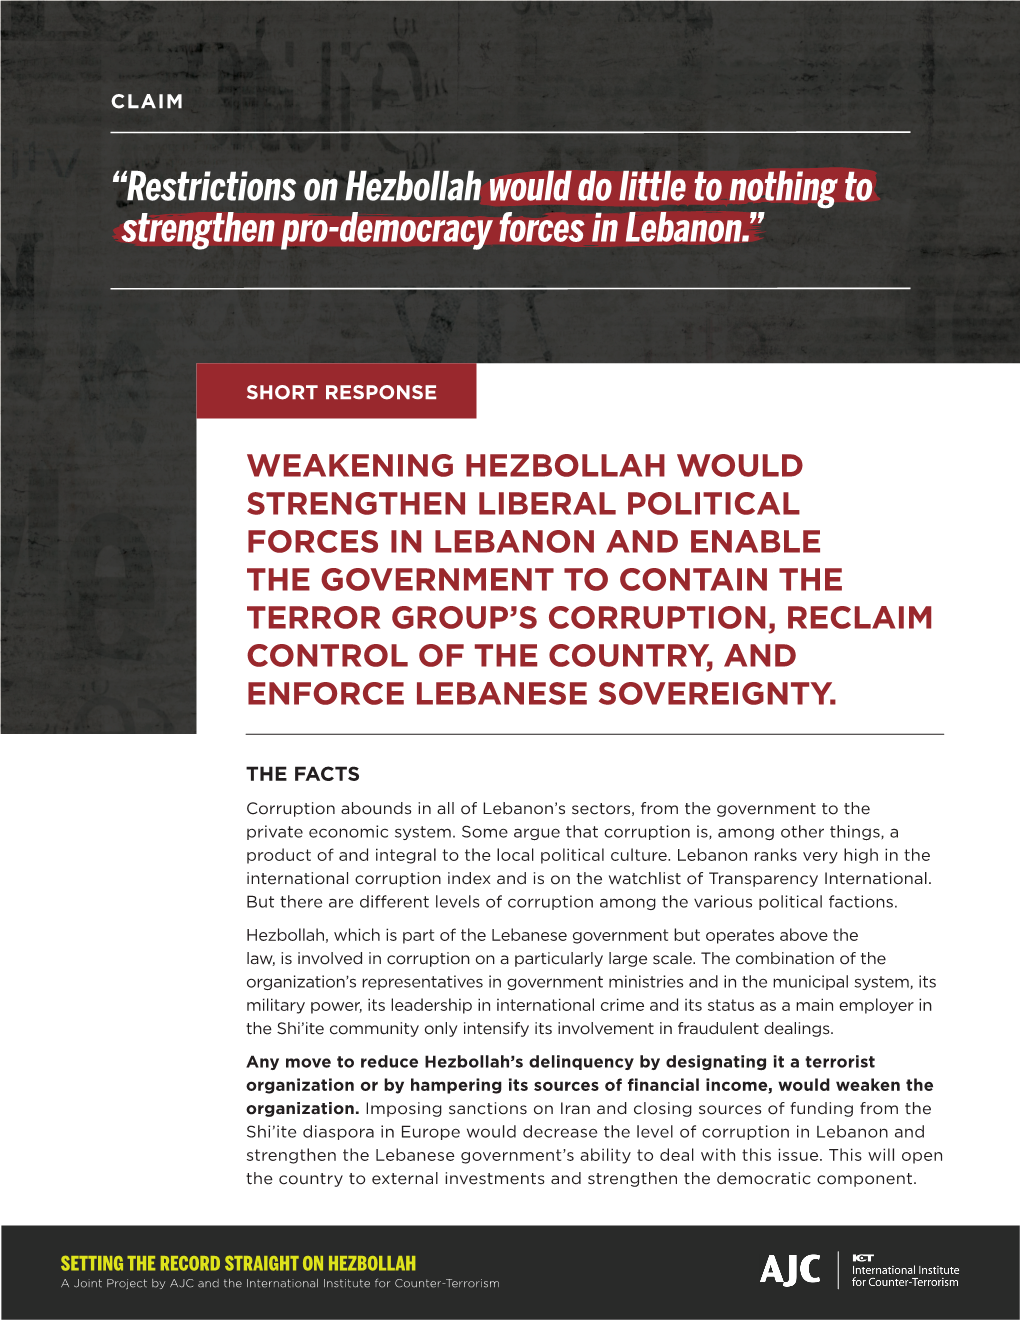 “Restrictions on Hezbollah Would Do Little to Nothing to Strengthen Pro-Democracy Forces in Lebanon.”